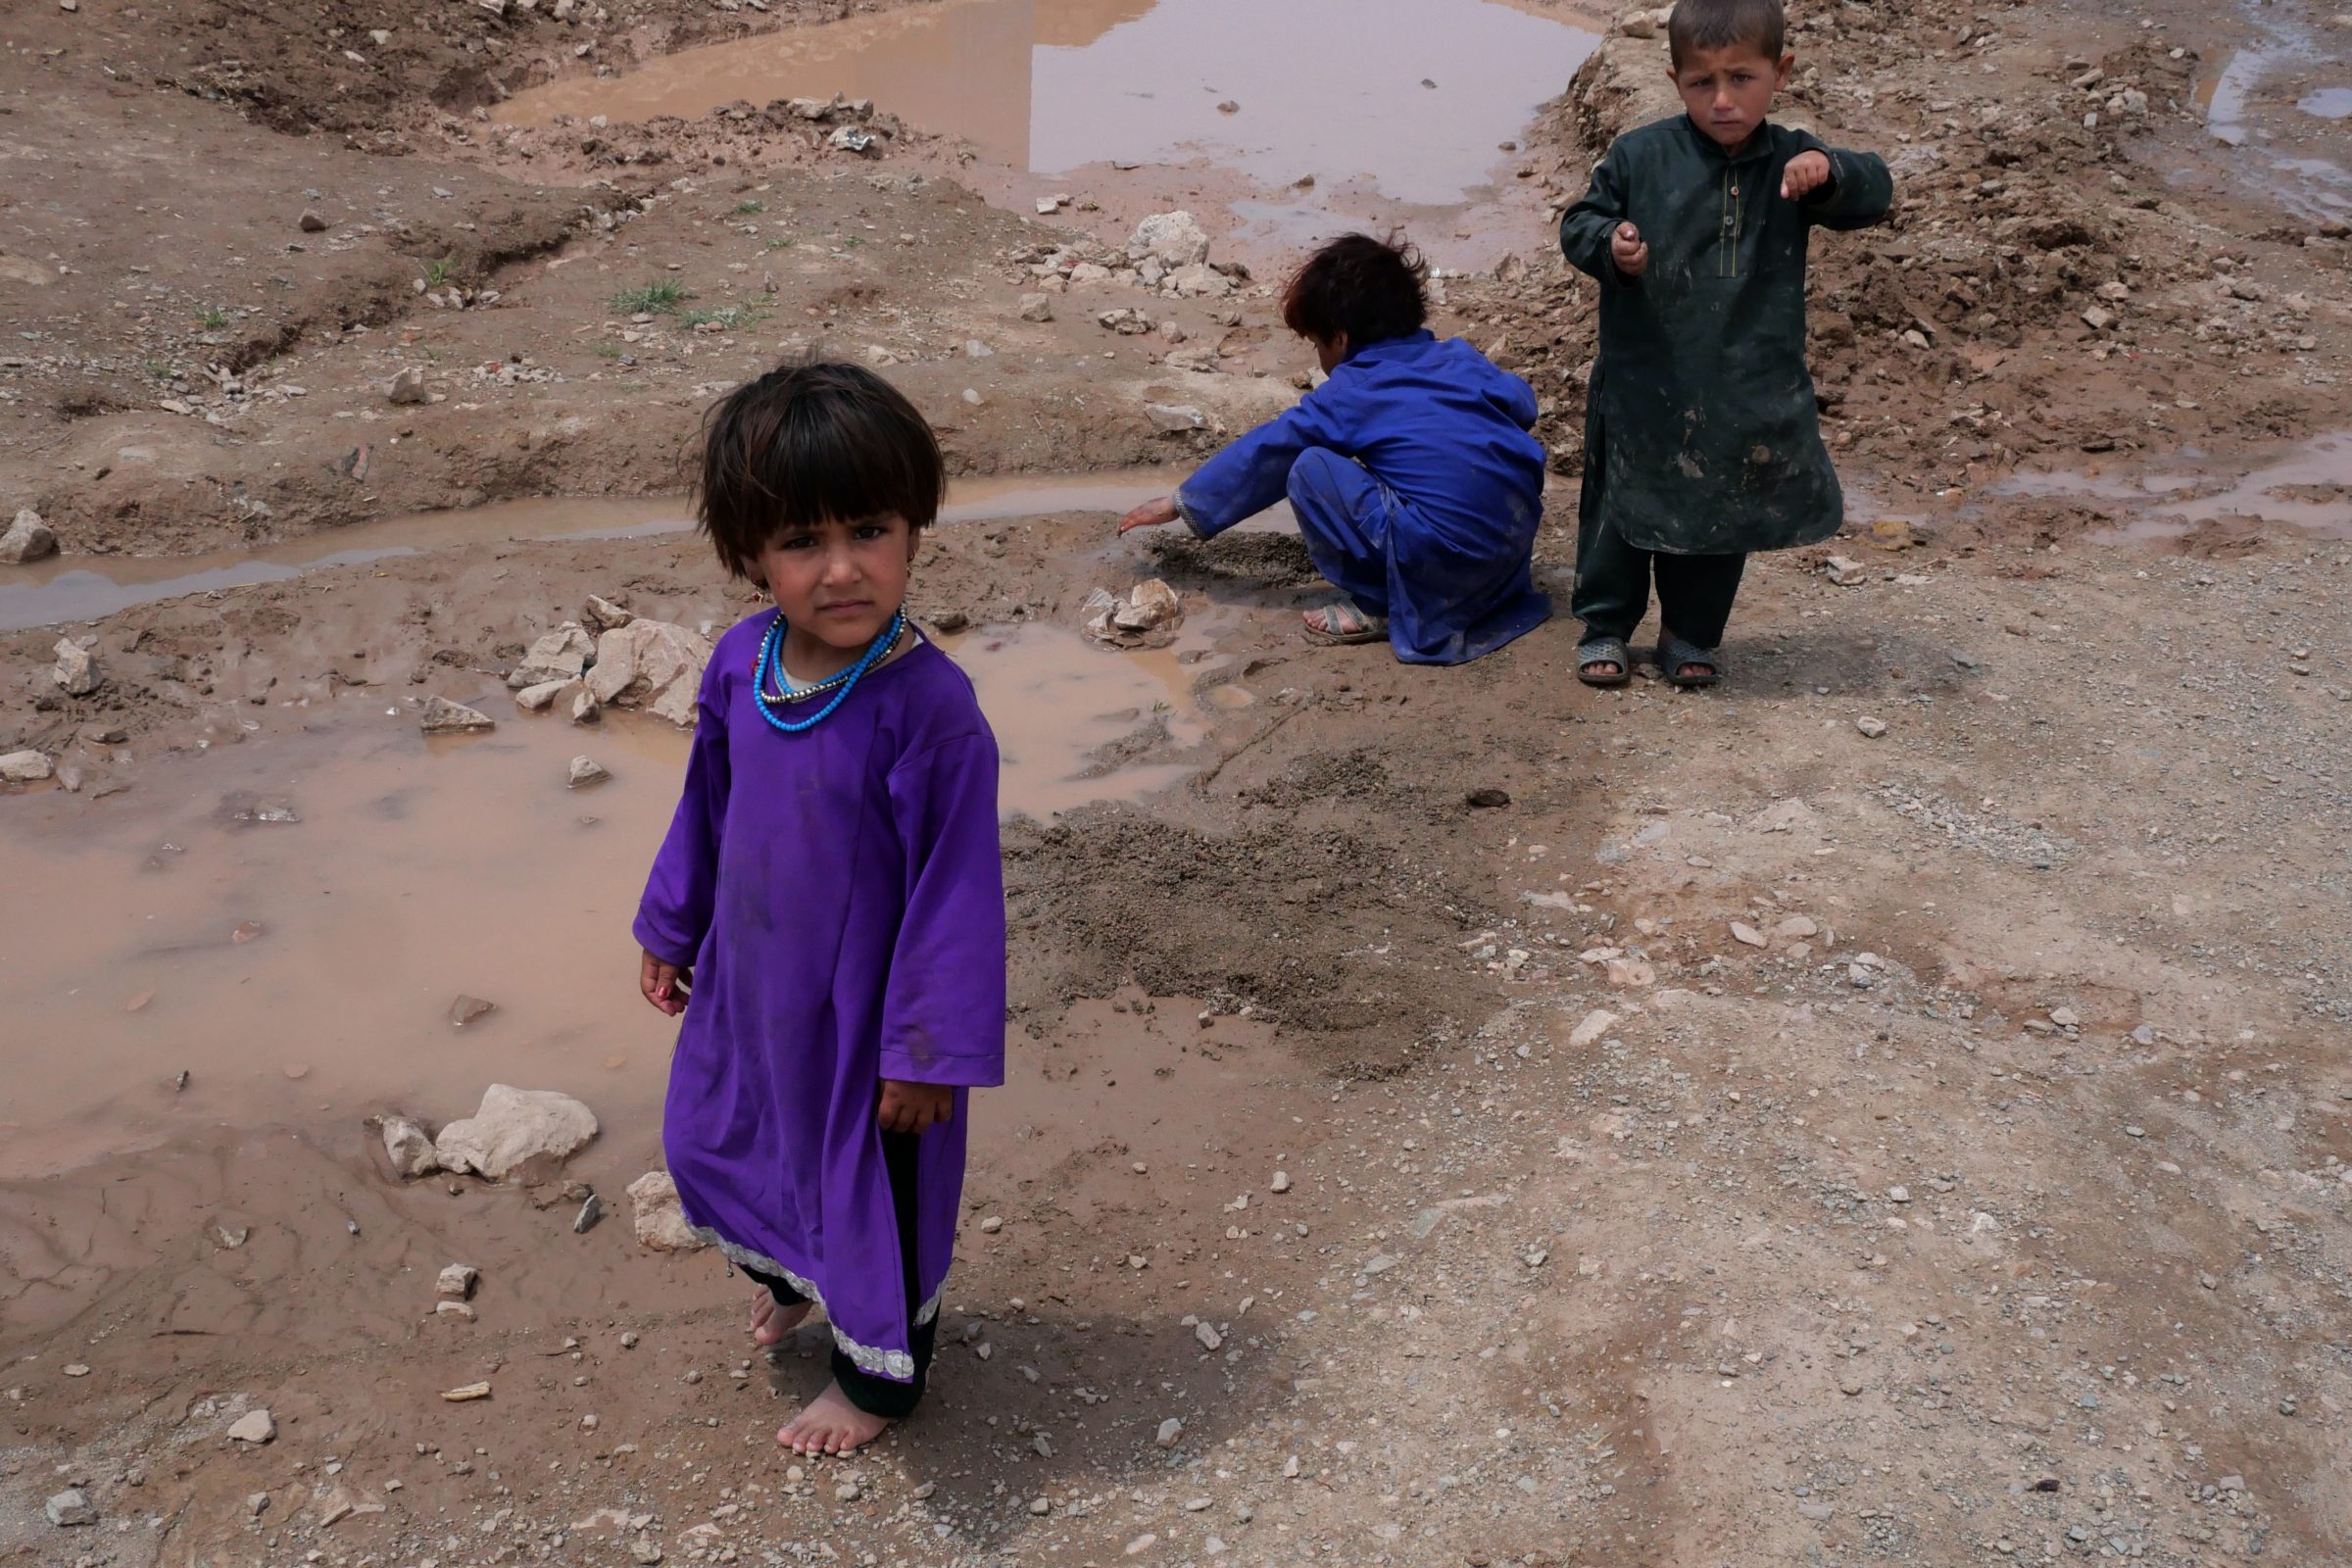 Afghan children play in the mud at an unofficial camp for internally displaced people in Herat, Afghanistan, May 2021. Photo: Charlie Faulkner